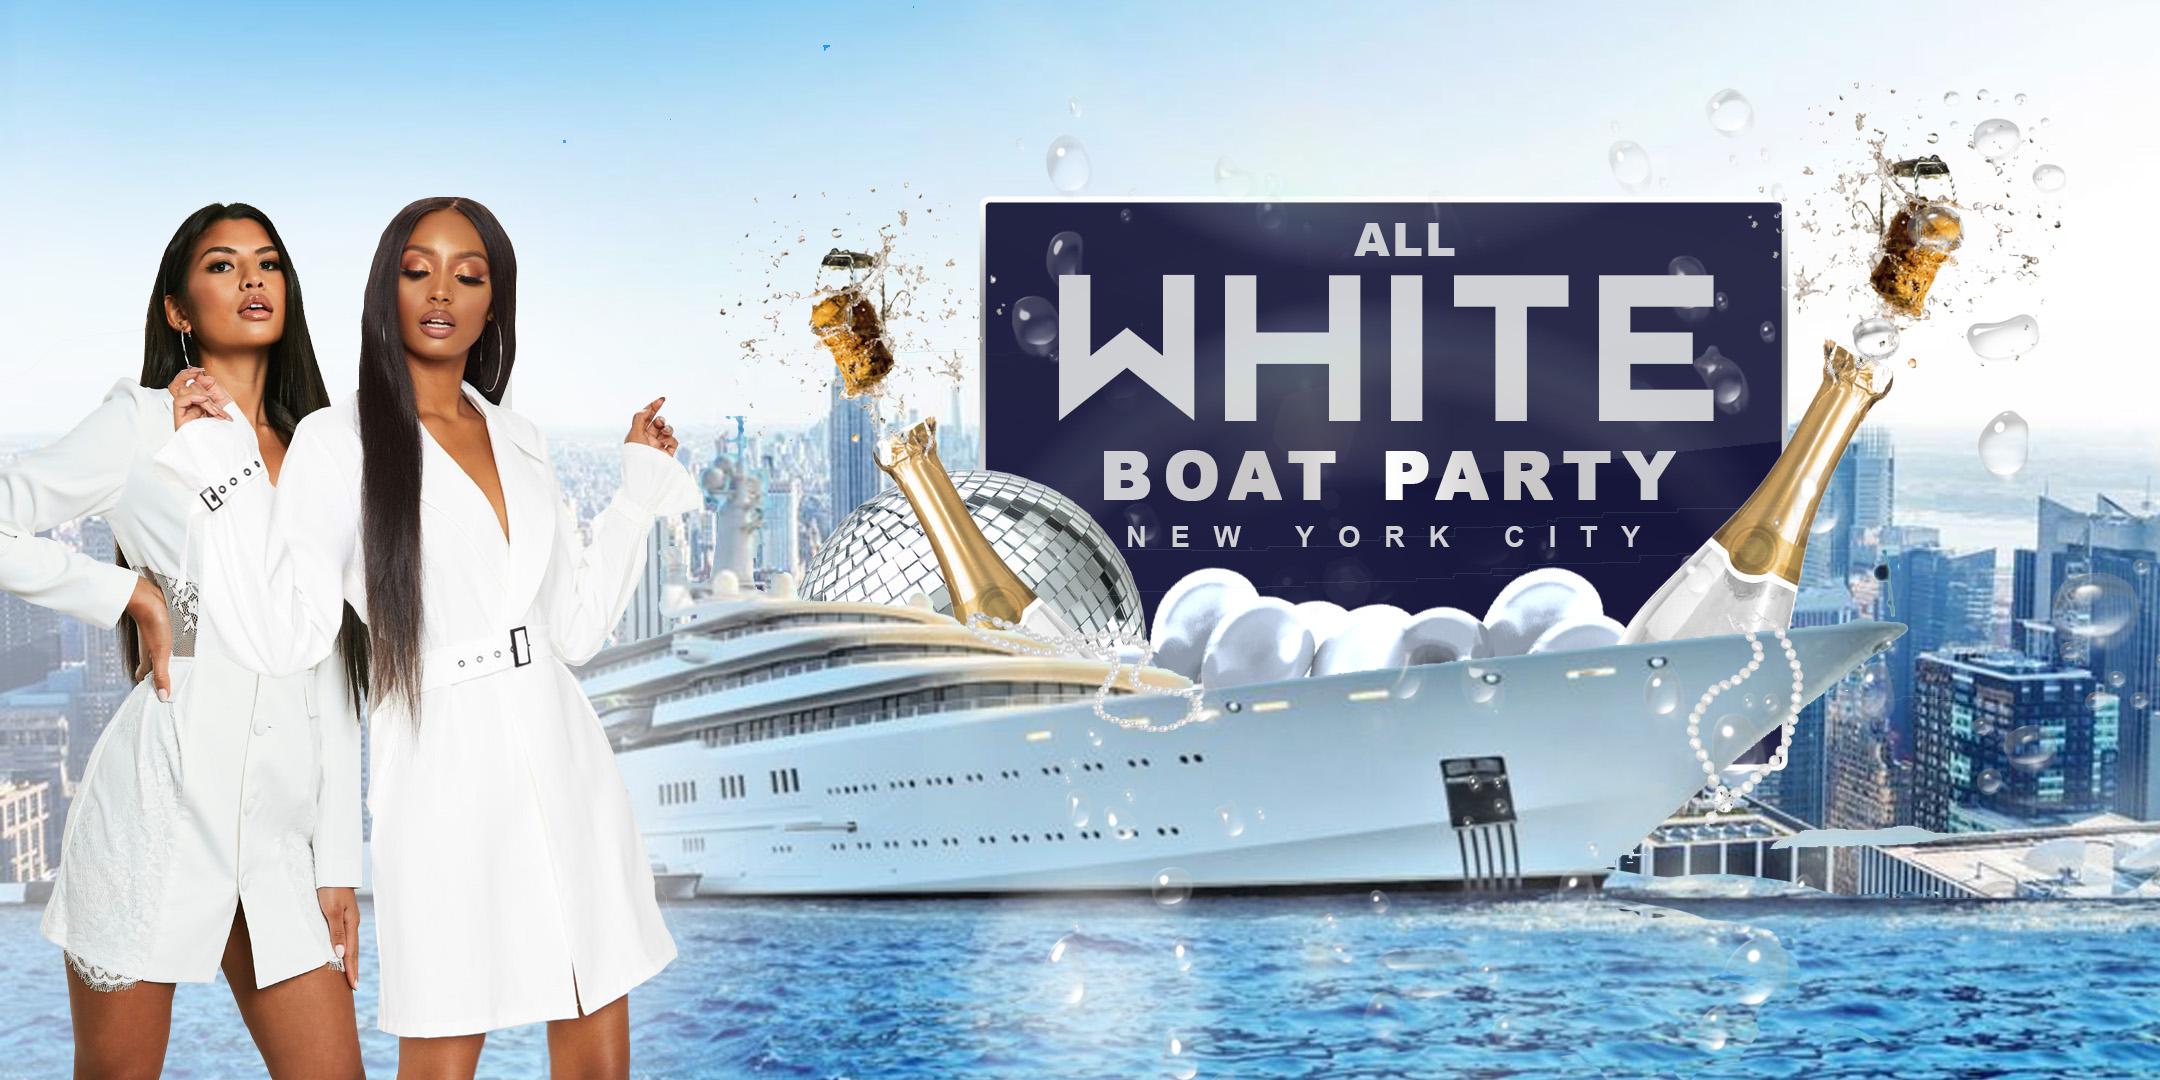 All White Hip Hop Sunset Boat Party - Sunday Yacht Cruise - Midtown NYC Skyline